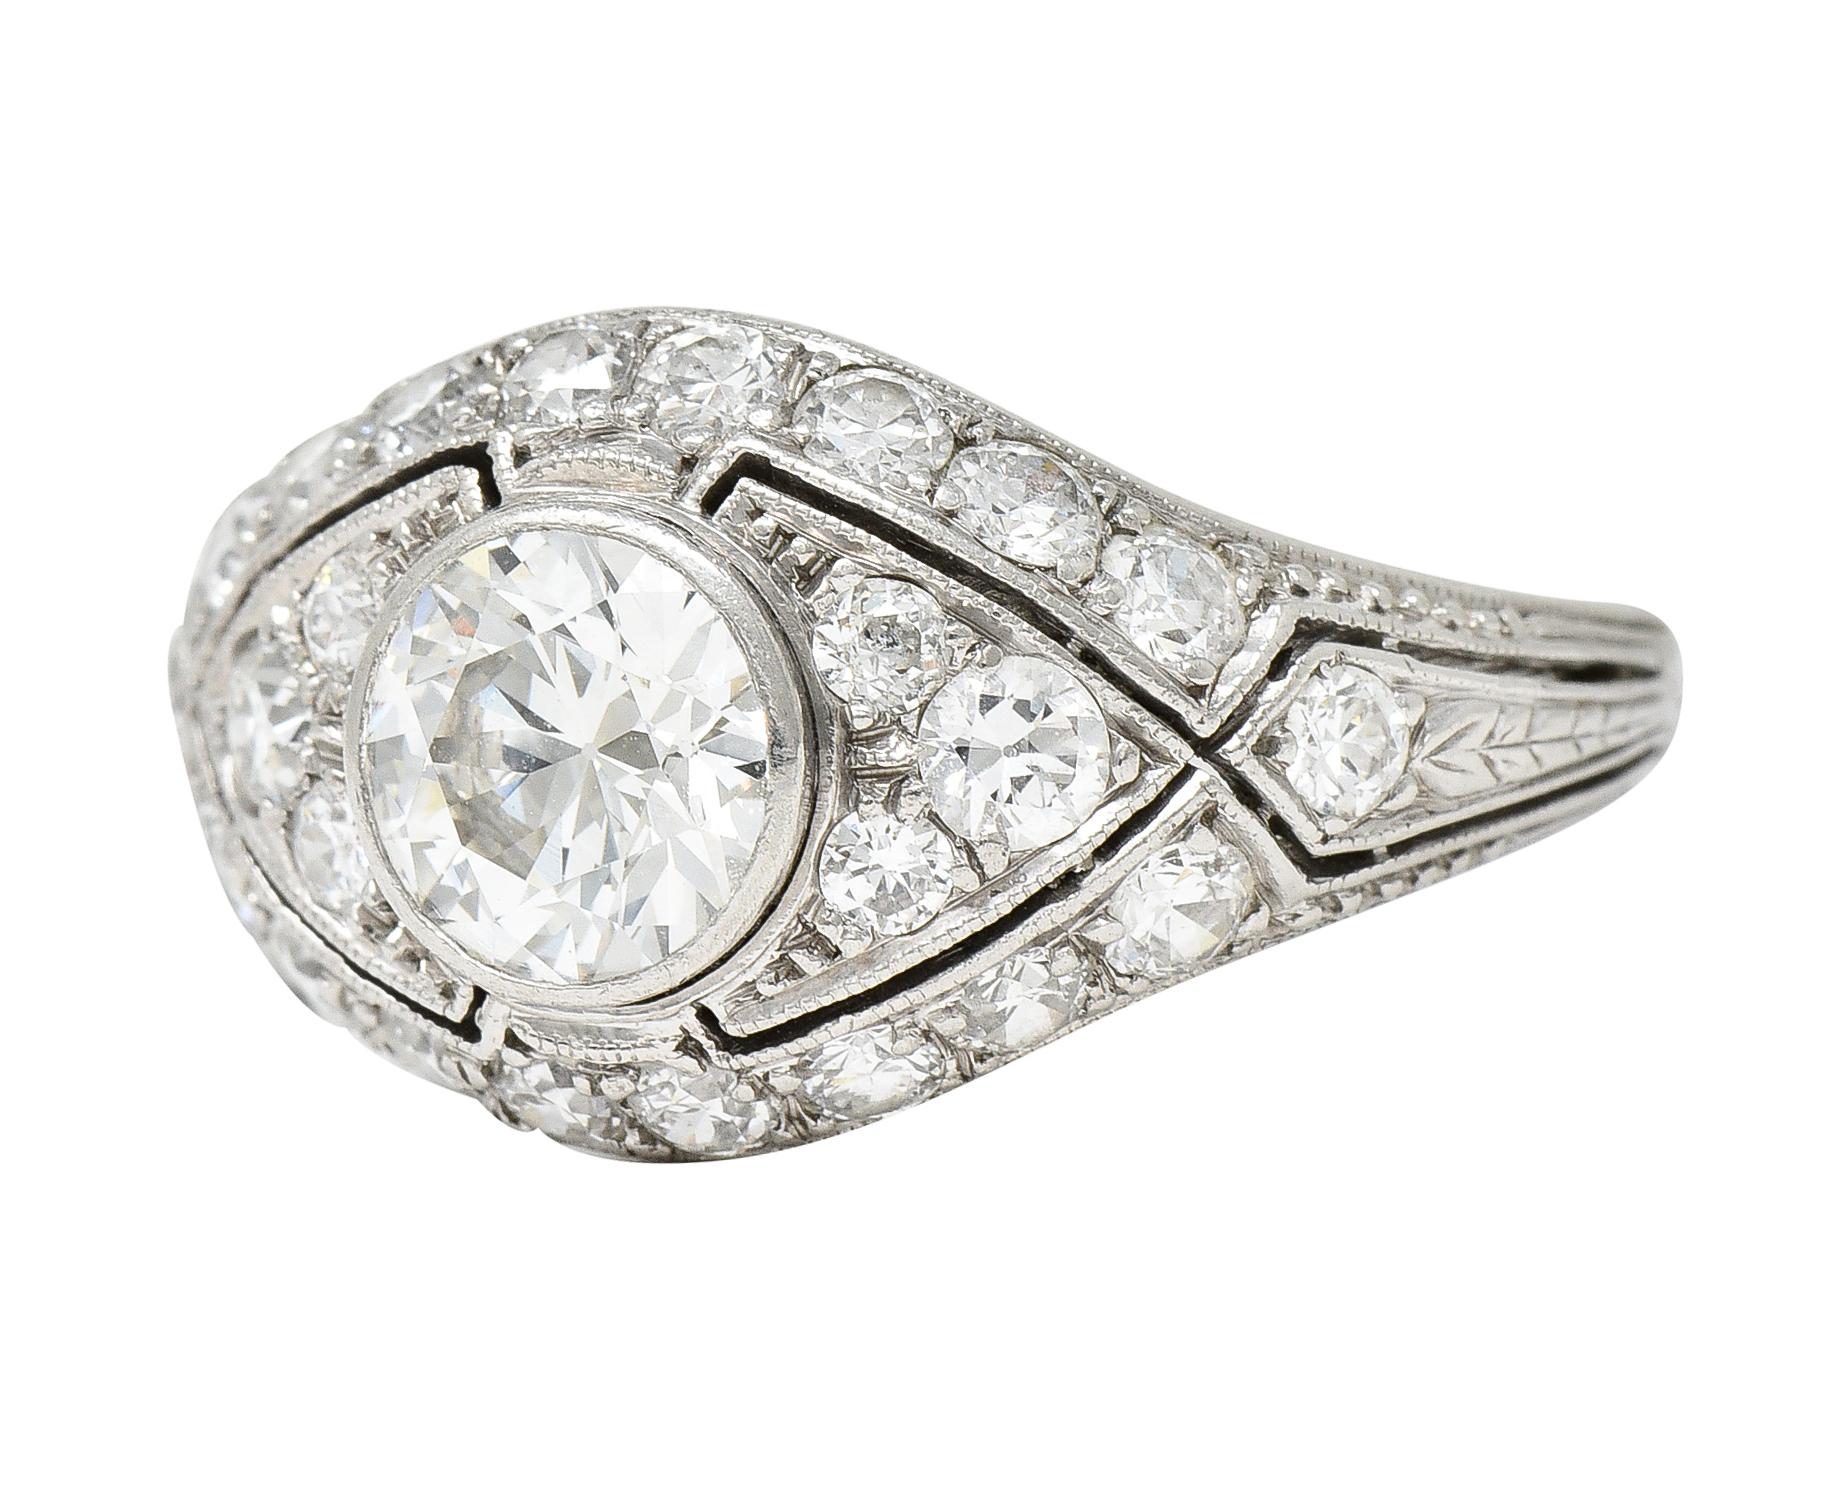 Marcus and Co. Art Deco 1.95 Carats Diamond Platinum Bombè Band Engagement Ring In Excellent Condition For Sale In Philadelphia, PA